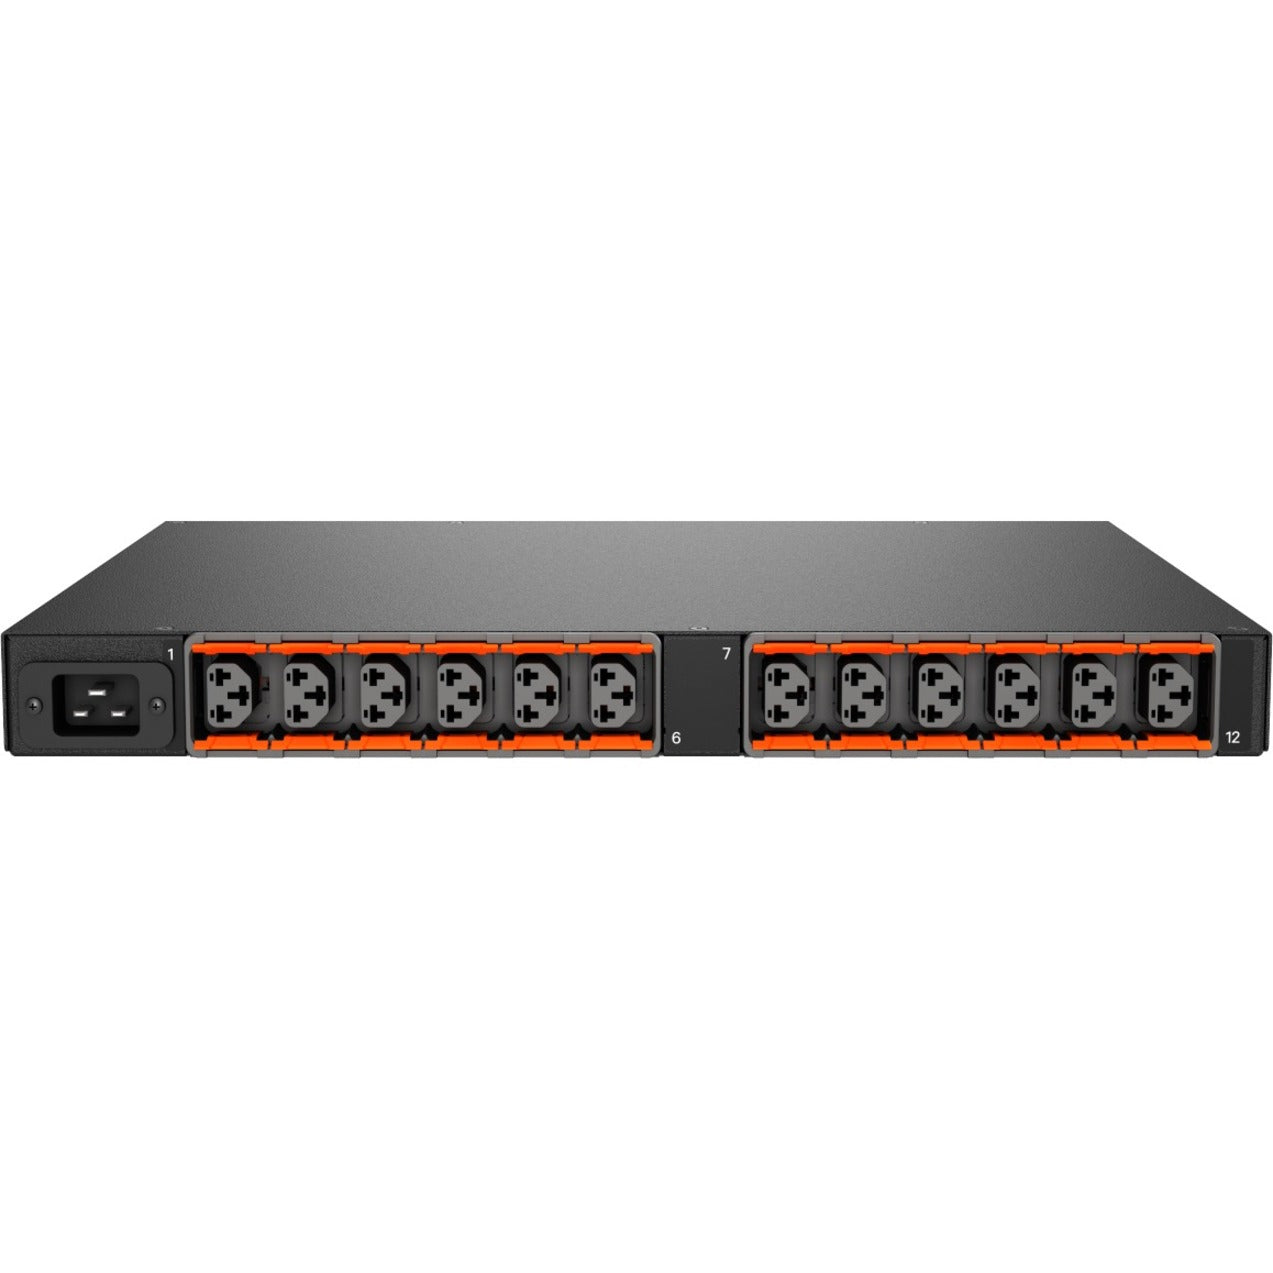 Geist UU30200 rPDU MUU3E1R5-12CF17-2C20A9H00-S 12-Outlets PDU, Managed, Remote Outlet Switching